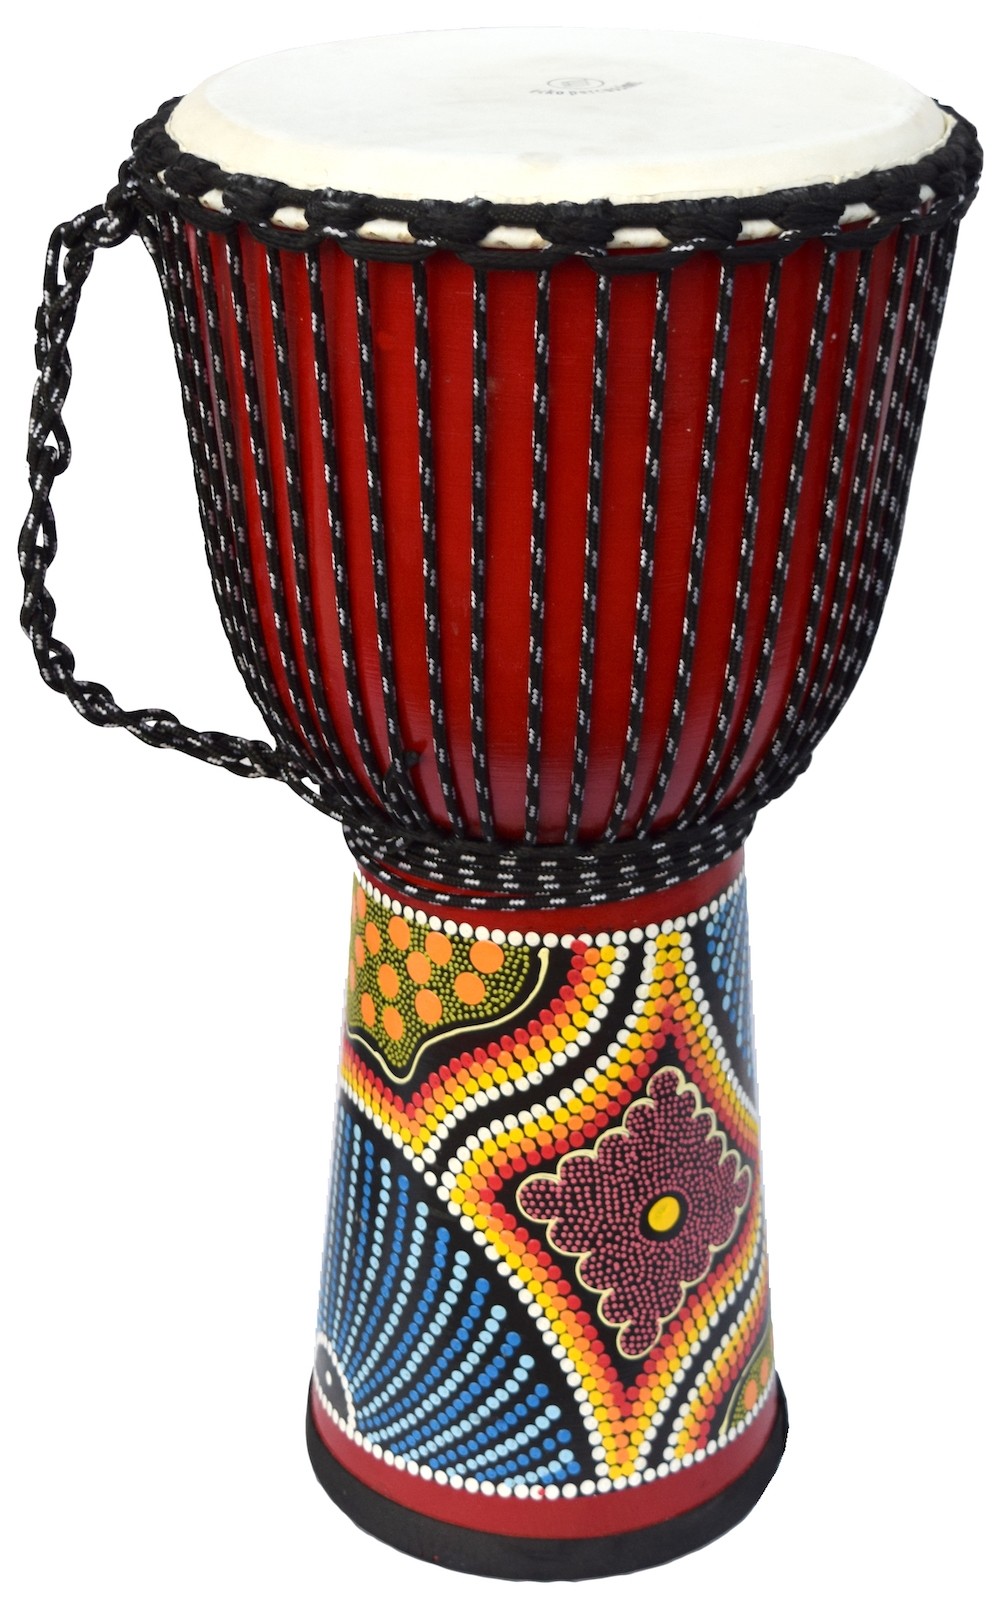 ECKO 60CM PAINTED DJEMBE - RED